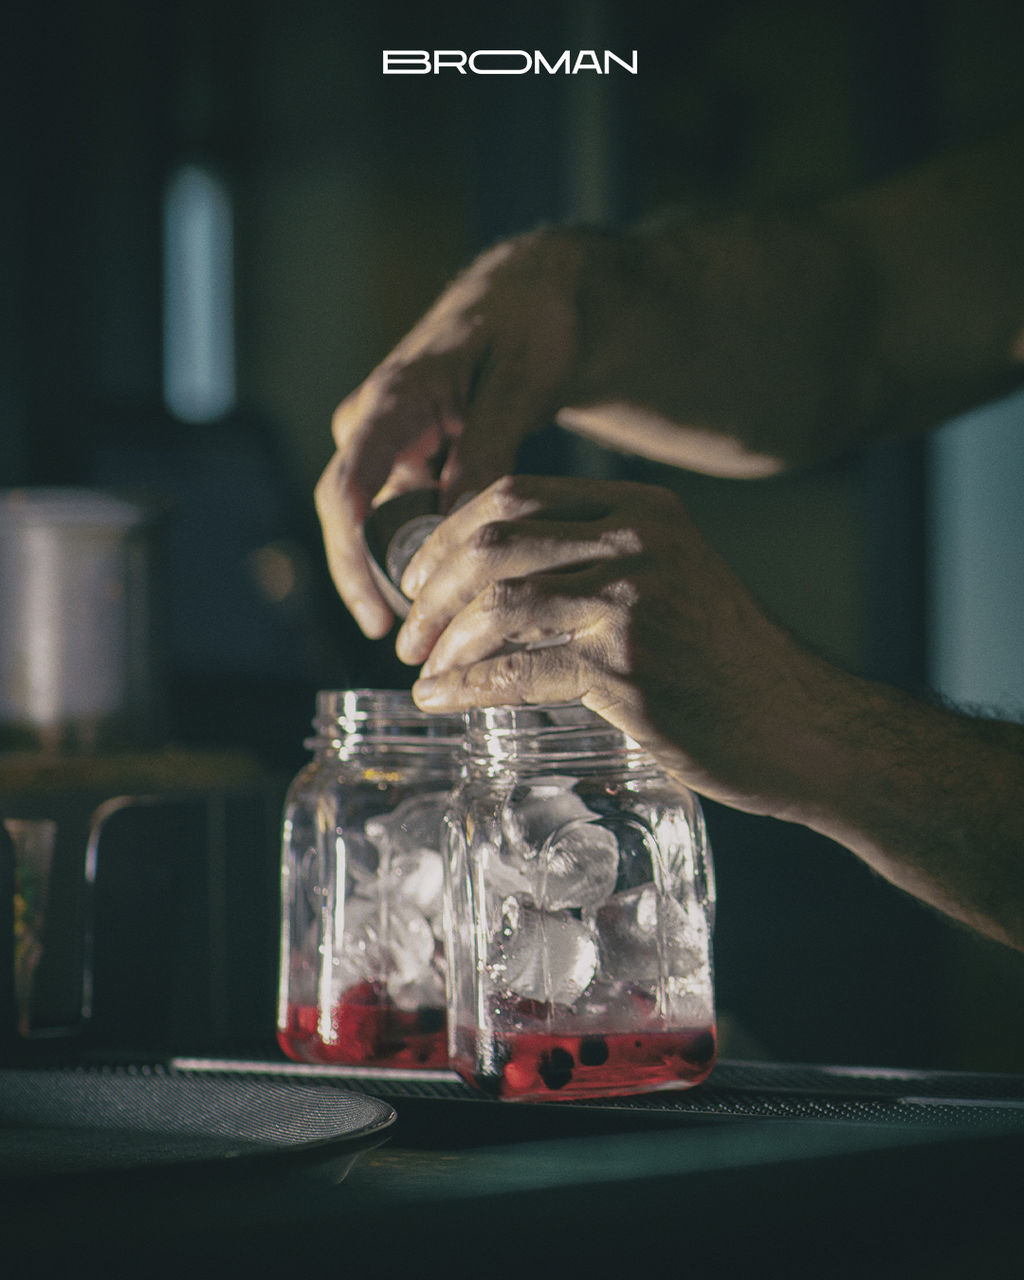 hand, one person, glass, indoors, adult, food and drink, bottle, jar, container, drink, occupation, business, alcohol, table, alcoholic beverage, holding, food, focus on foreground, refreshment